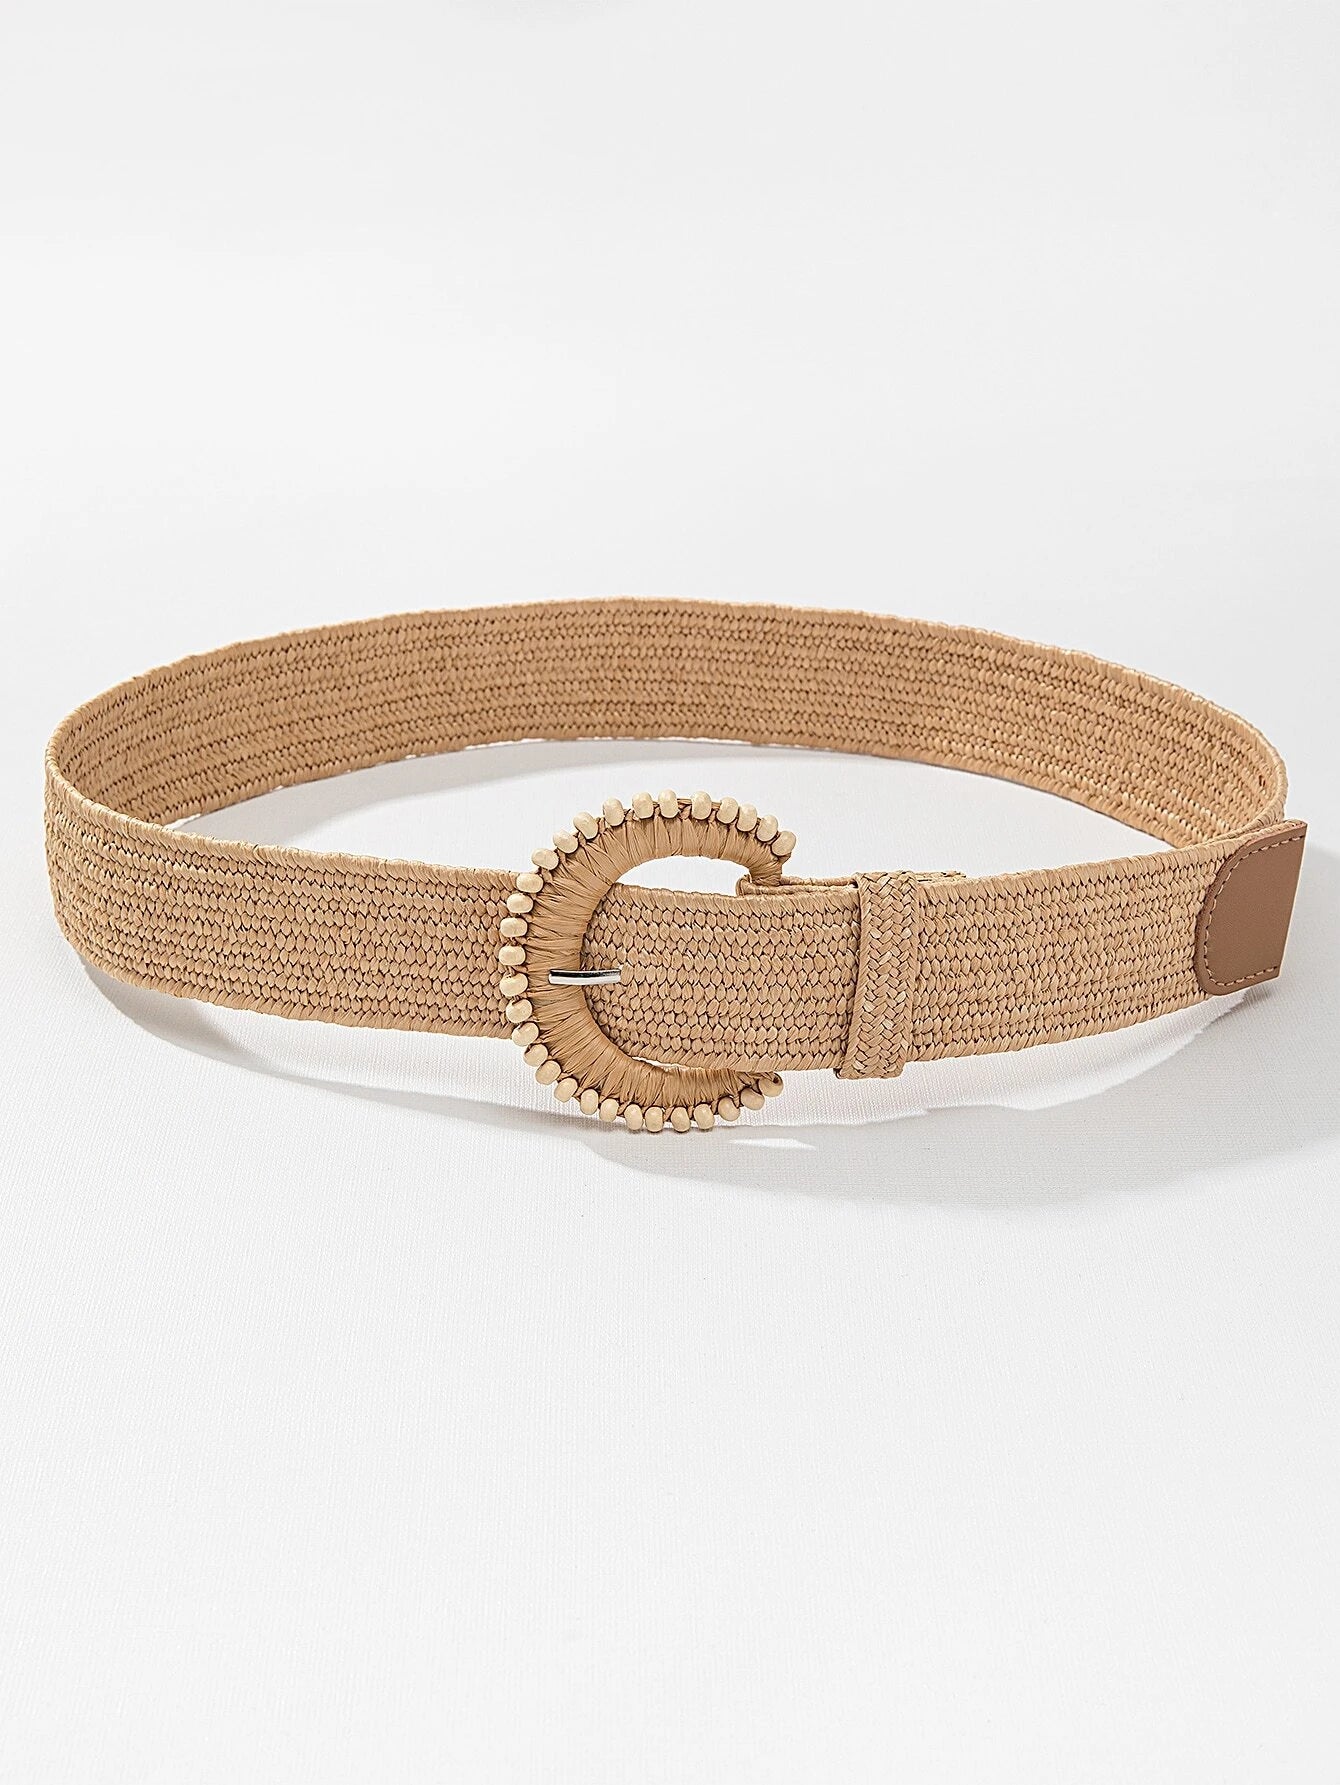 woven straw belt with leather on the end and beads decor edging on the buckle